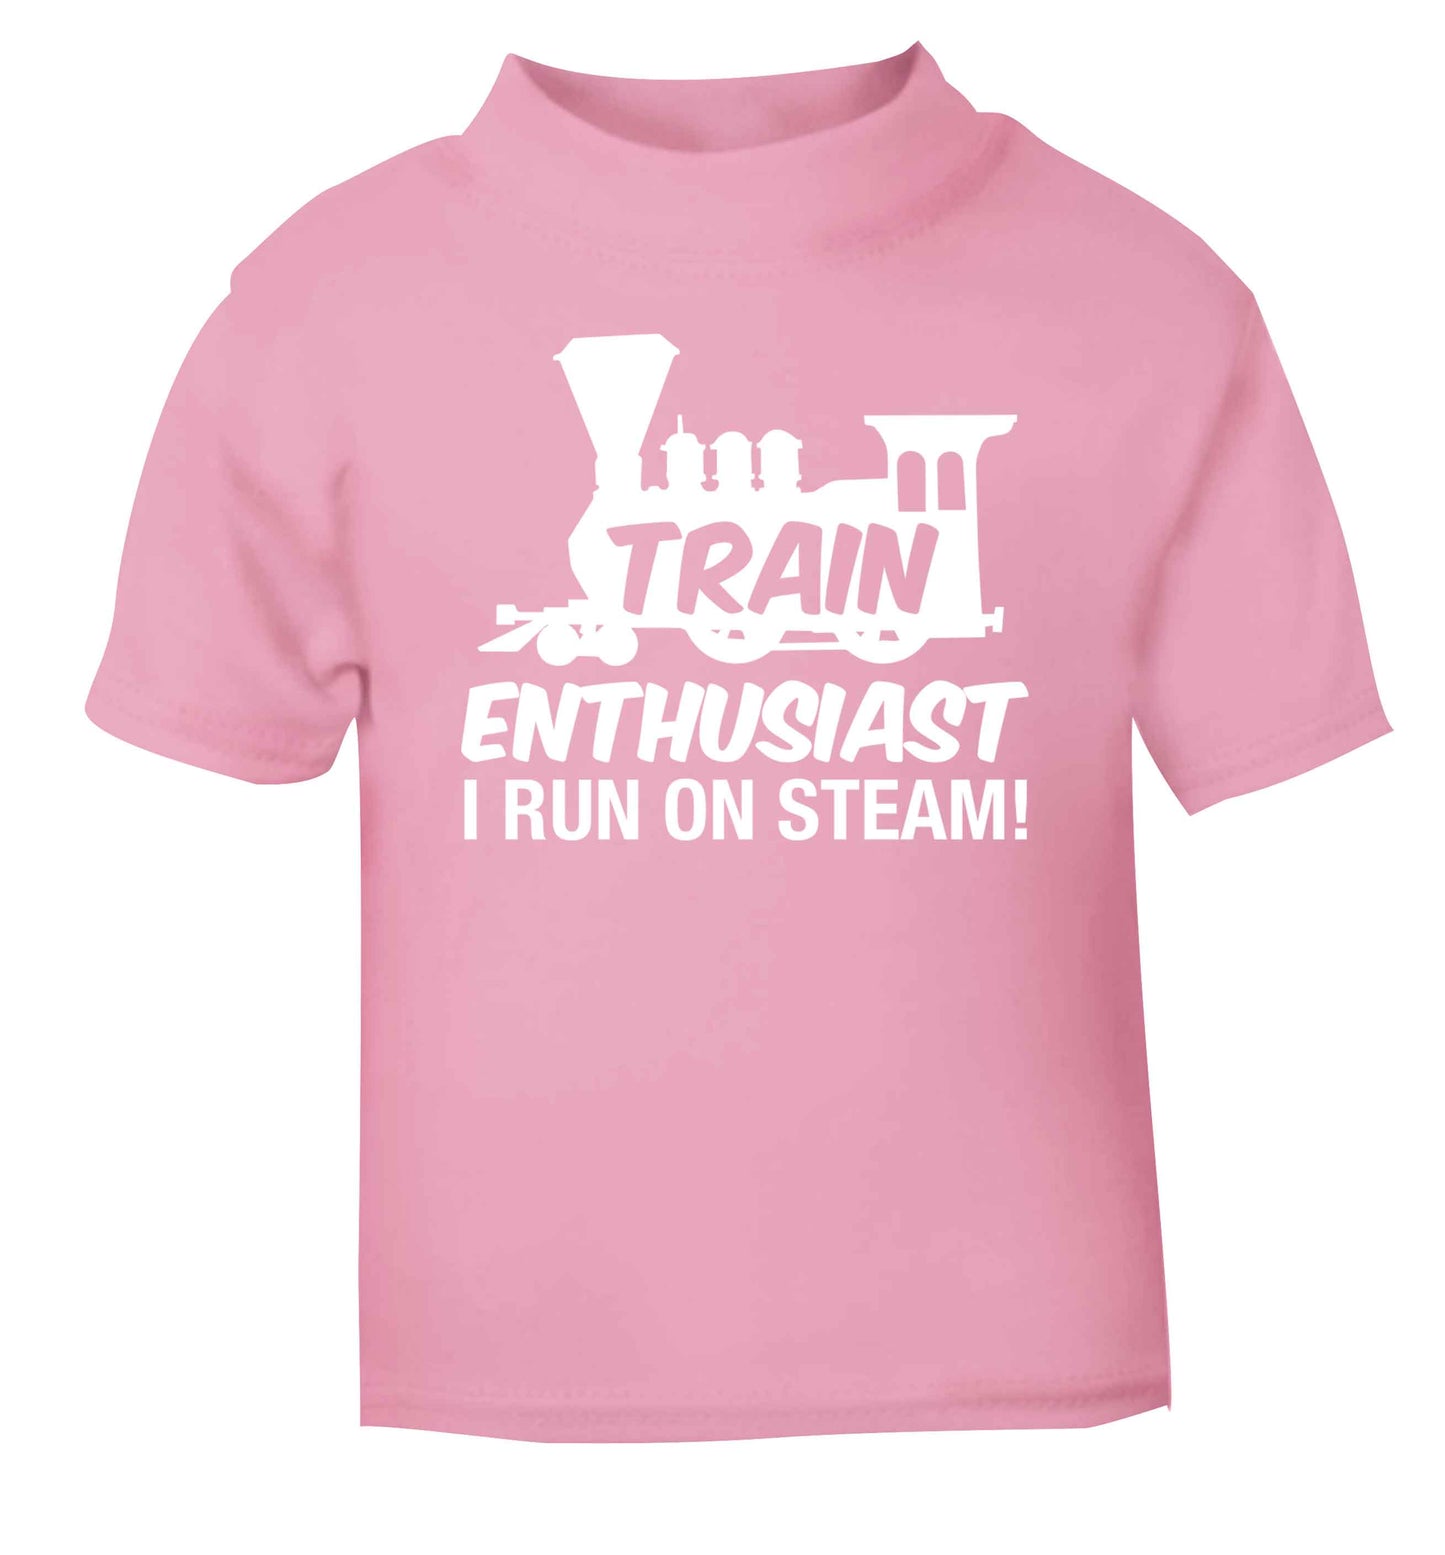 Train enthusiast I run on steam light pink Baby Toddler Tshirt 2 Years